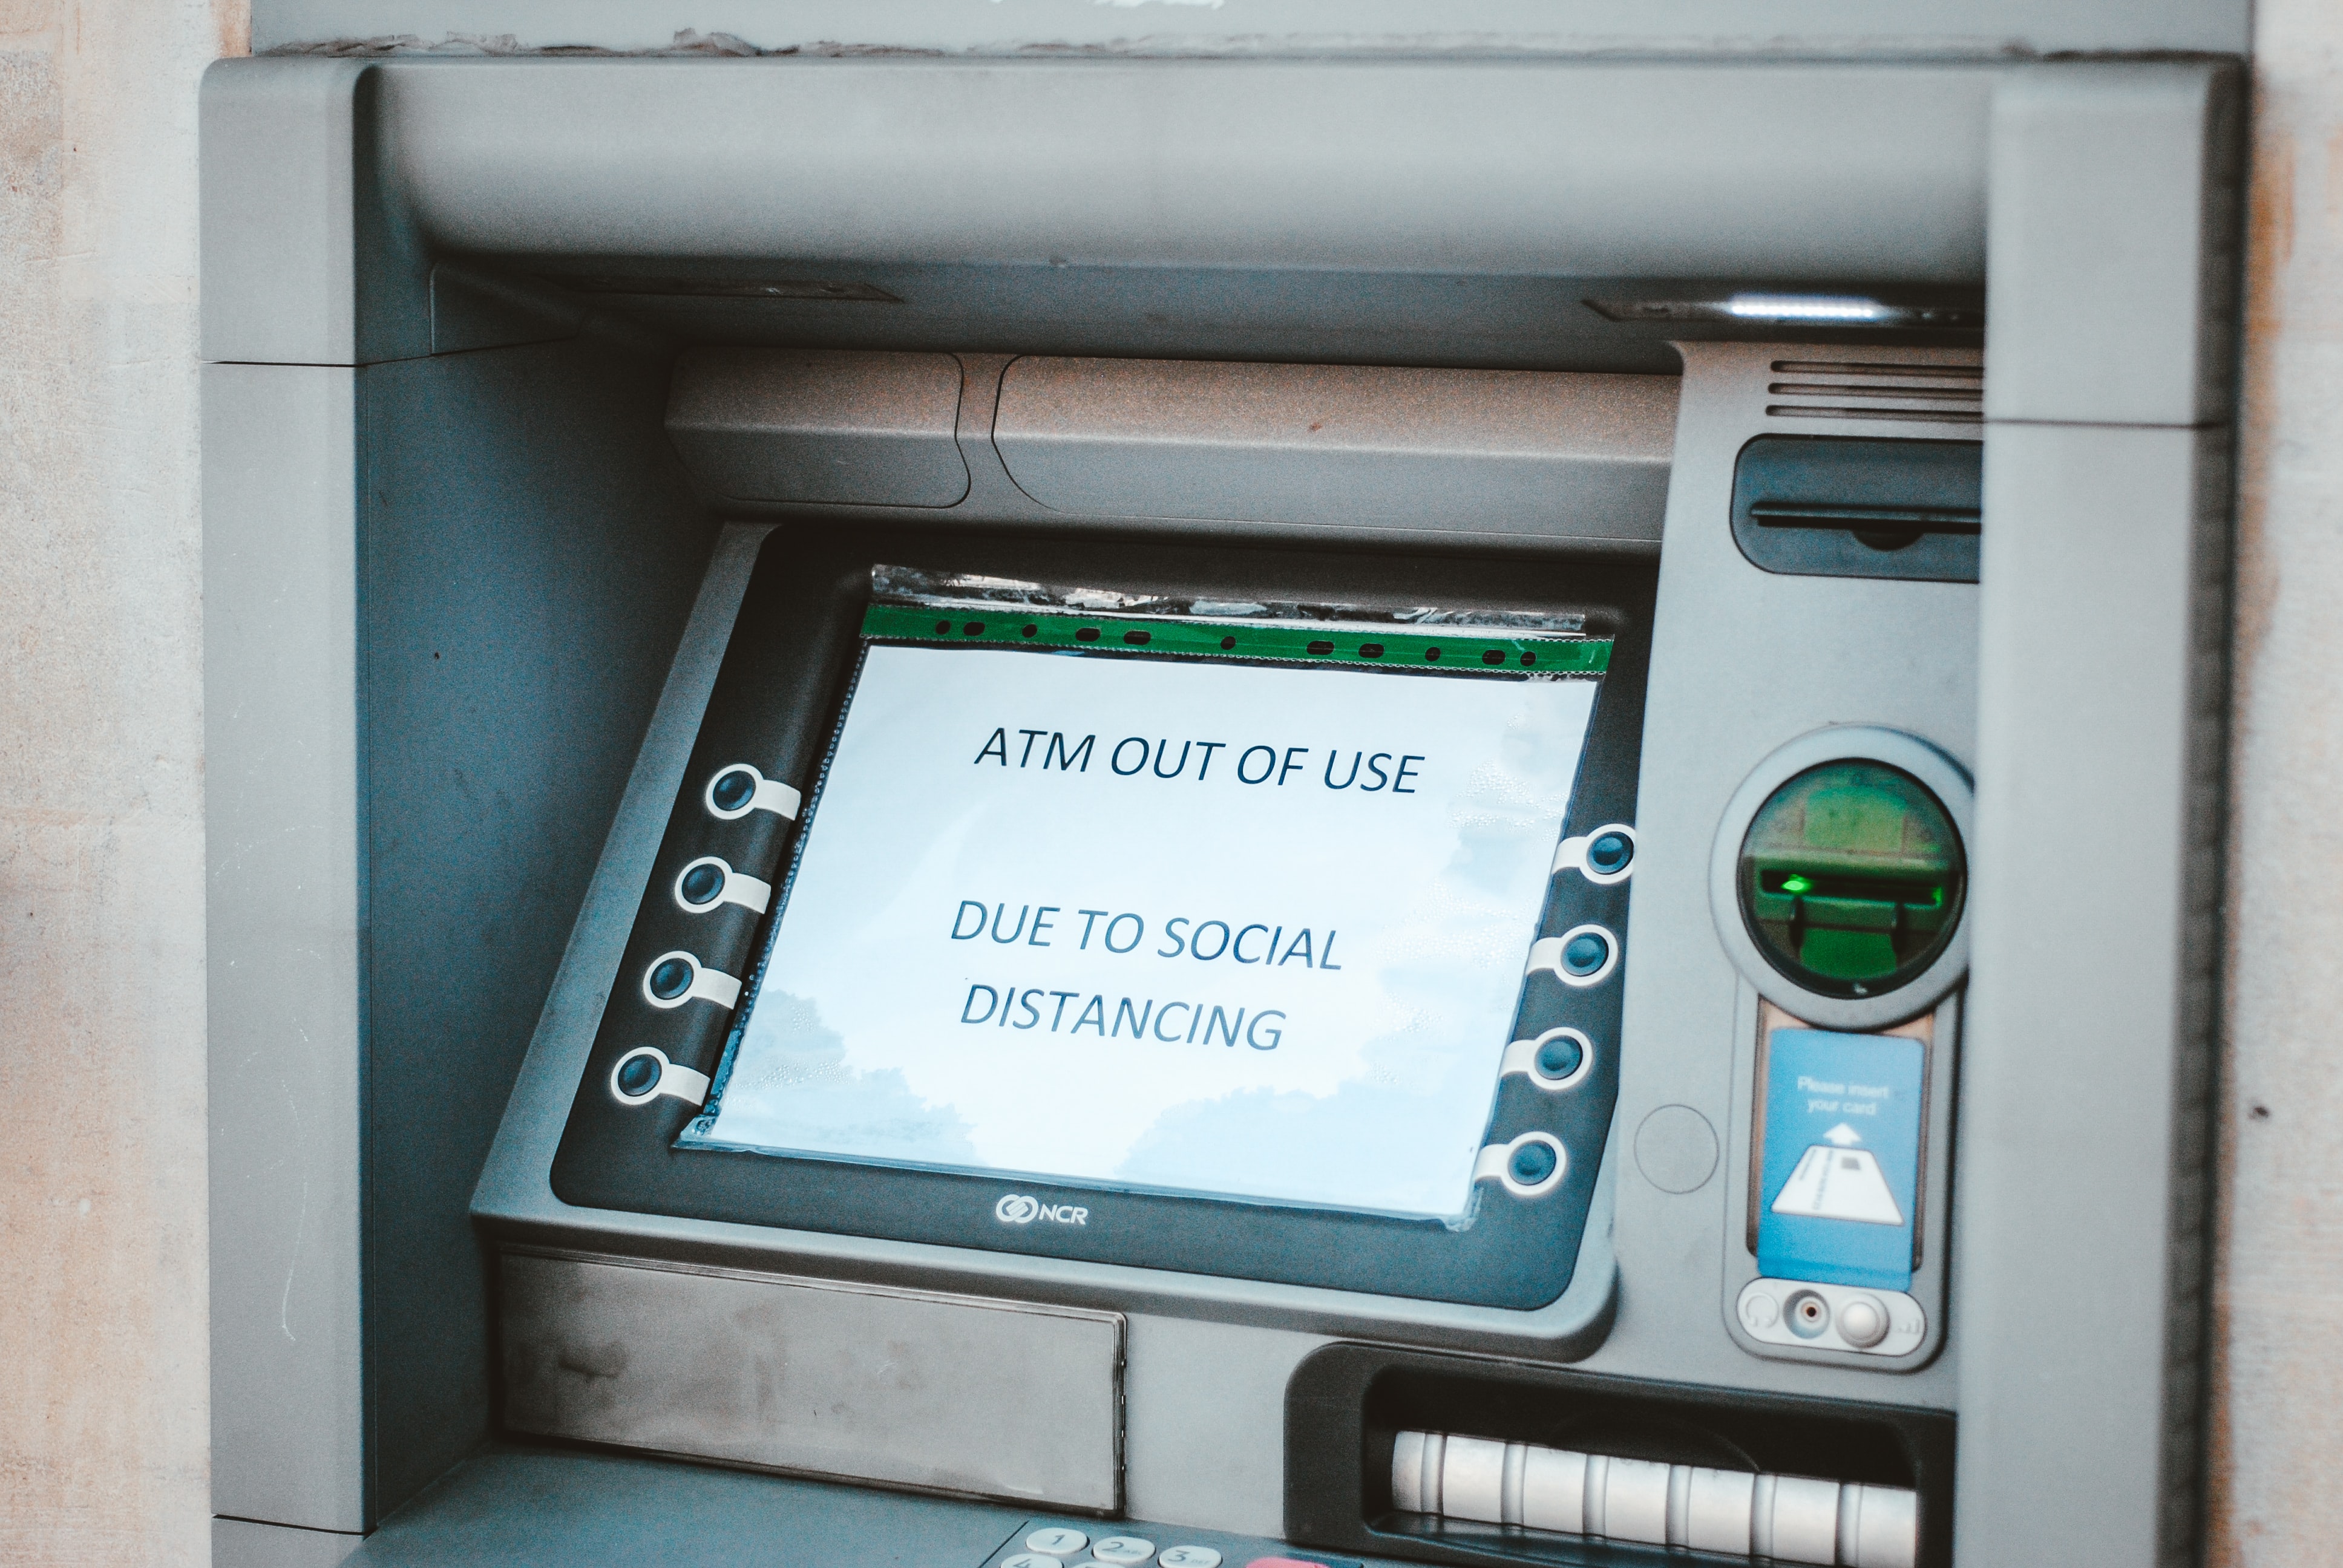 Even ATMs are doing their part to promote social distancing. Photo by Hello I&#039;m Nik on Unsplash.